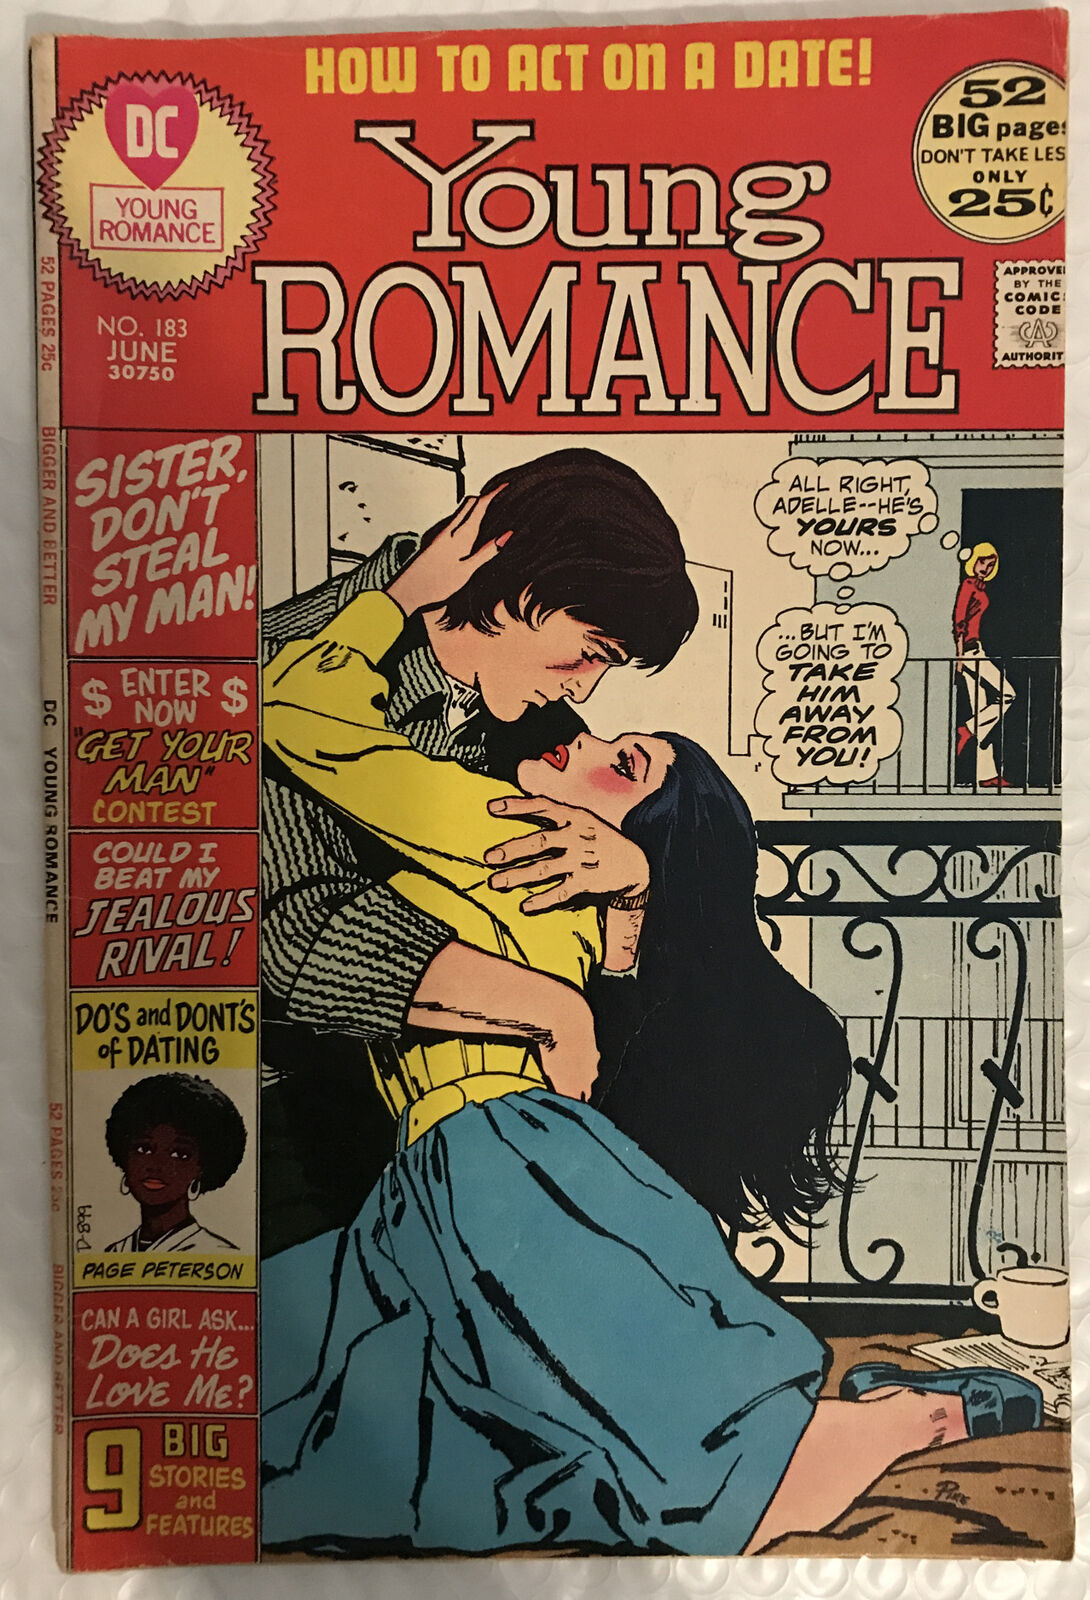 DC Young Romance-How To Act On A Date June No. 183